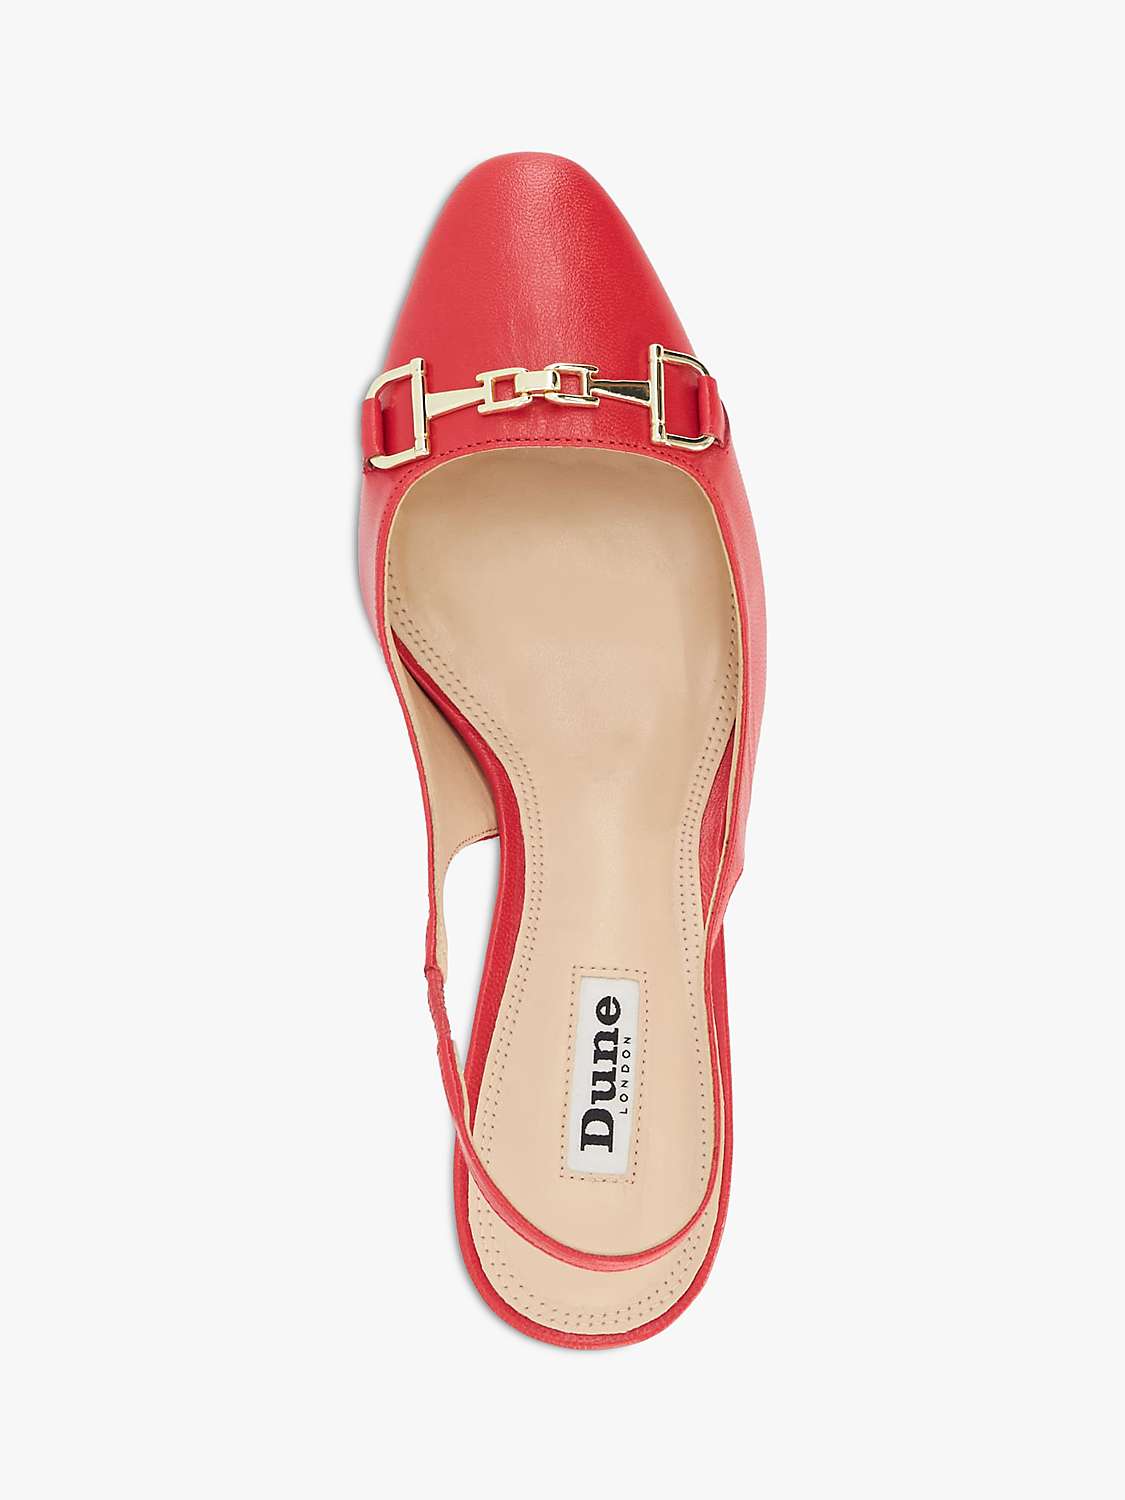 Dune Detailed High Heel Leather Court Shoes, Red at John Lewis & Partners